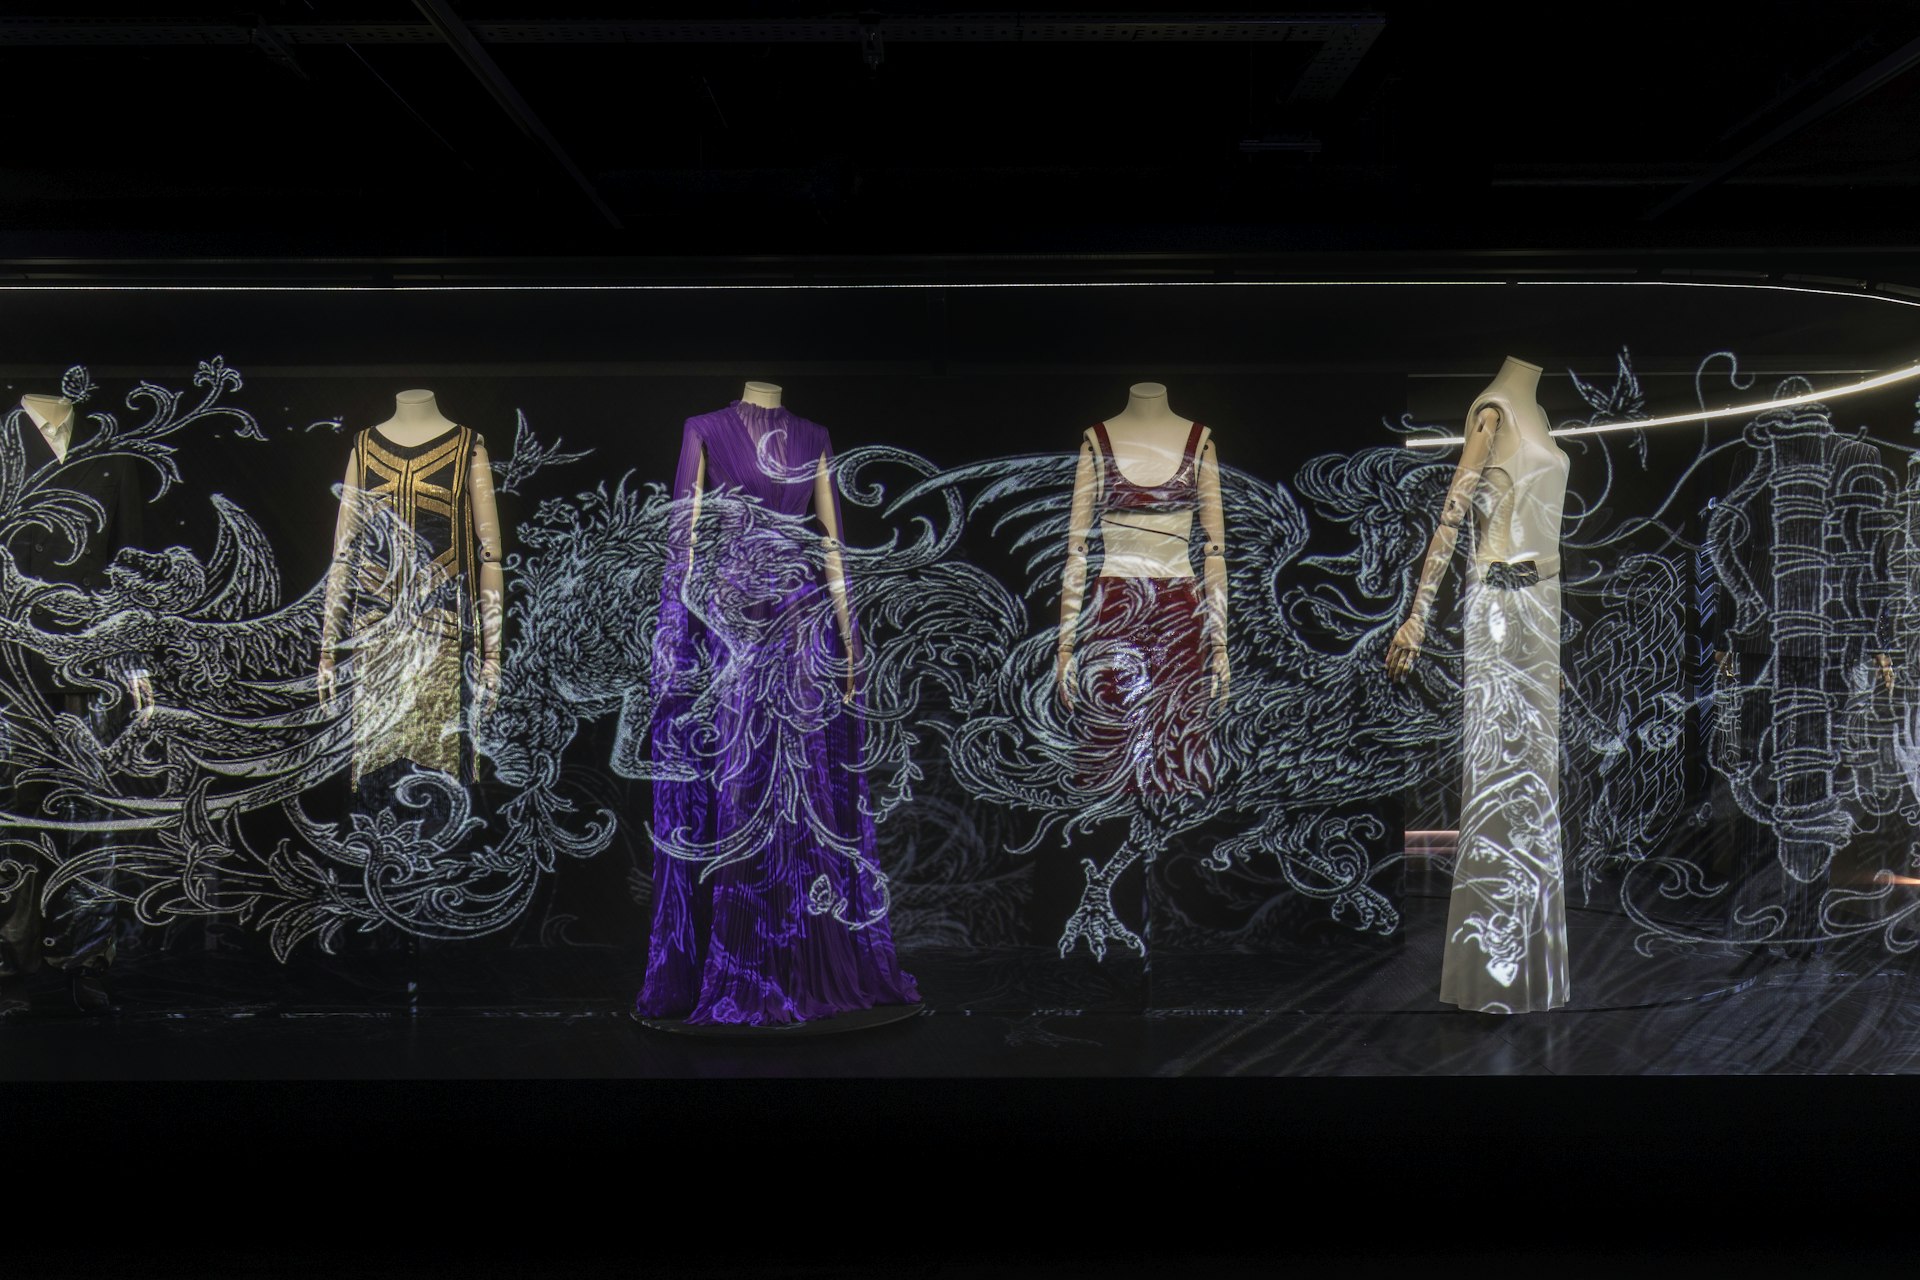 A display from the “Gucci Cosmos” exhibition